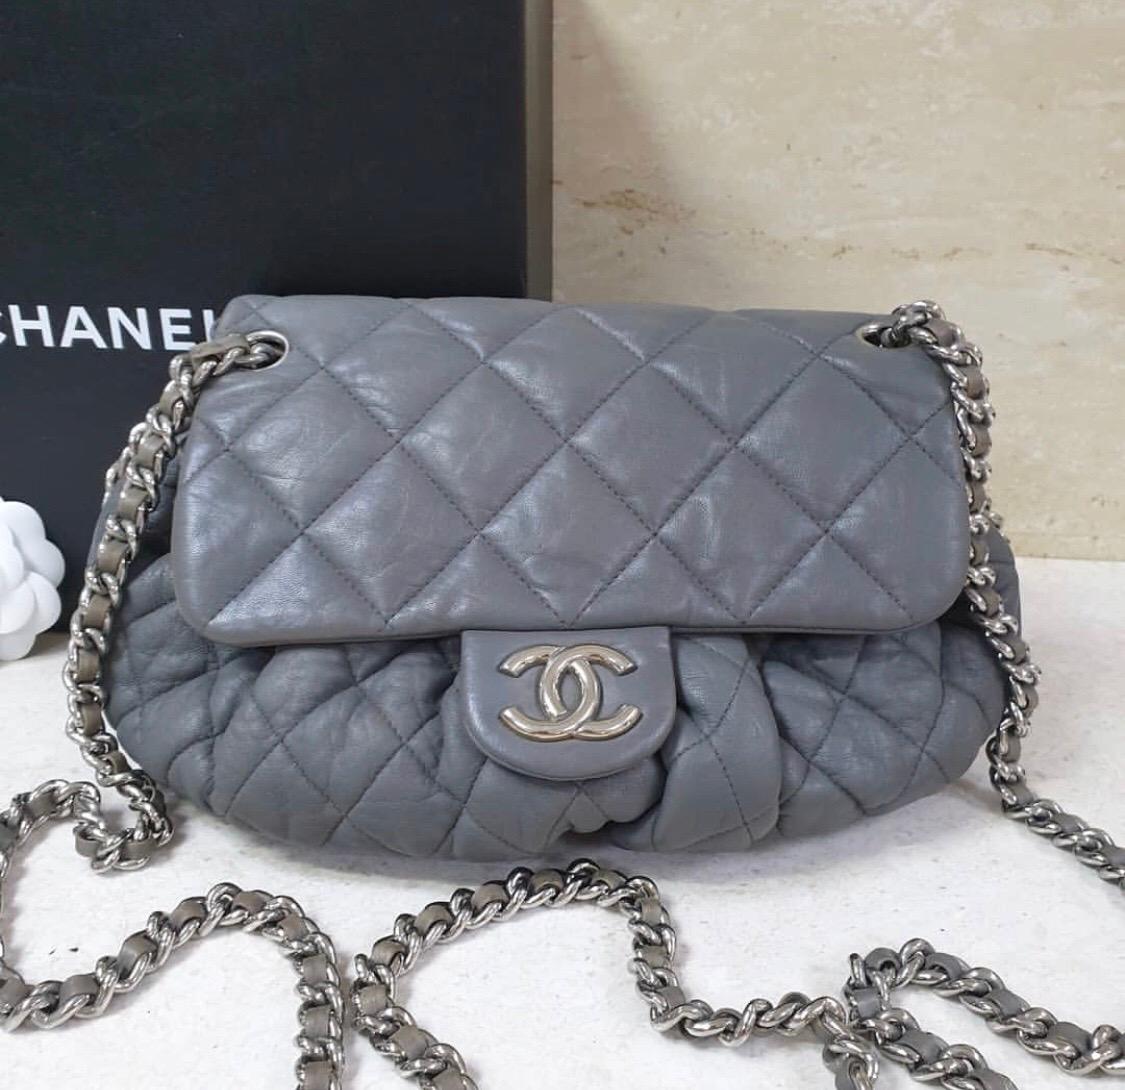 Chanel Chain Around Medium-Large Size in stunning grey distressed calf skin.

Distressed calf skin is soft and at the same time a very resistent leather! You will wear this bag a lot and it will be always looking like new!

Perfect to wear cross